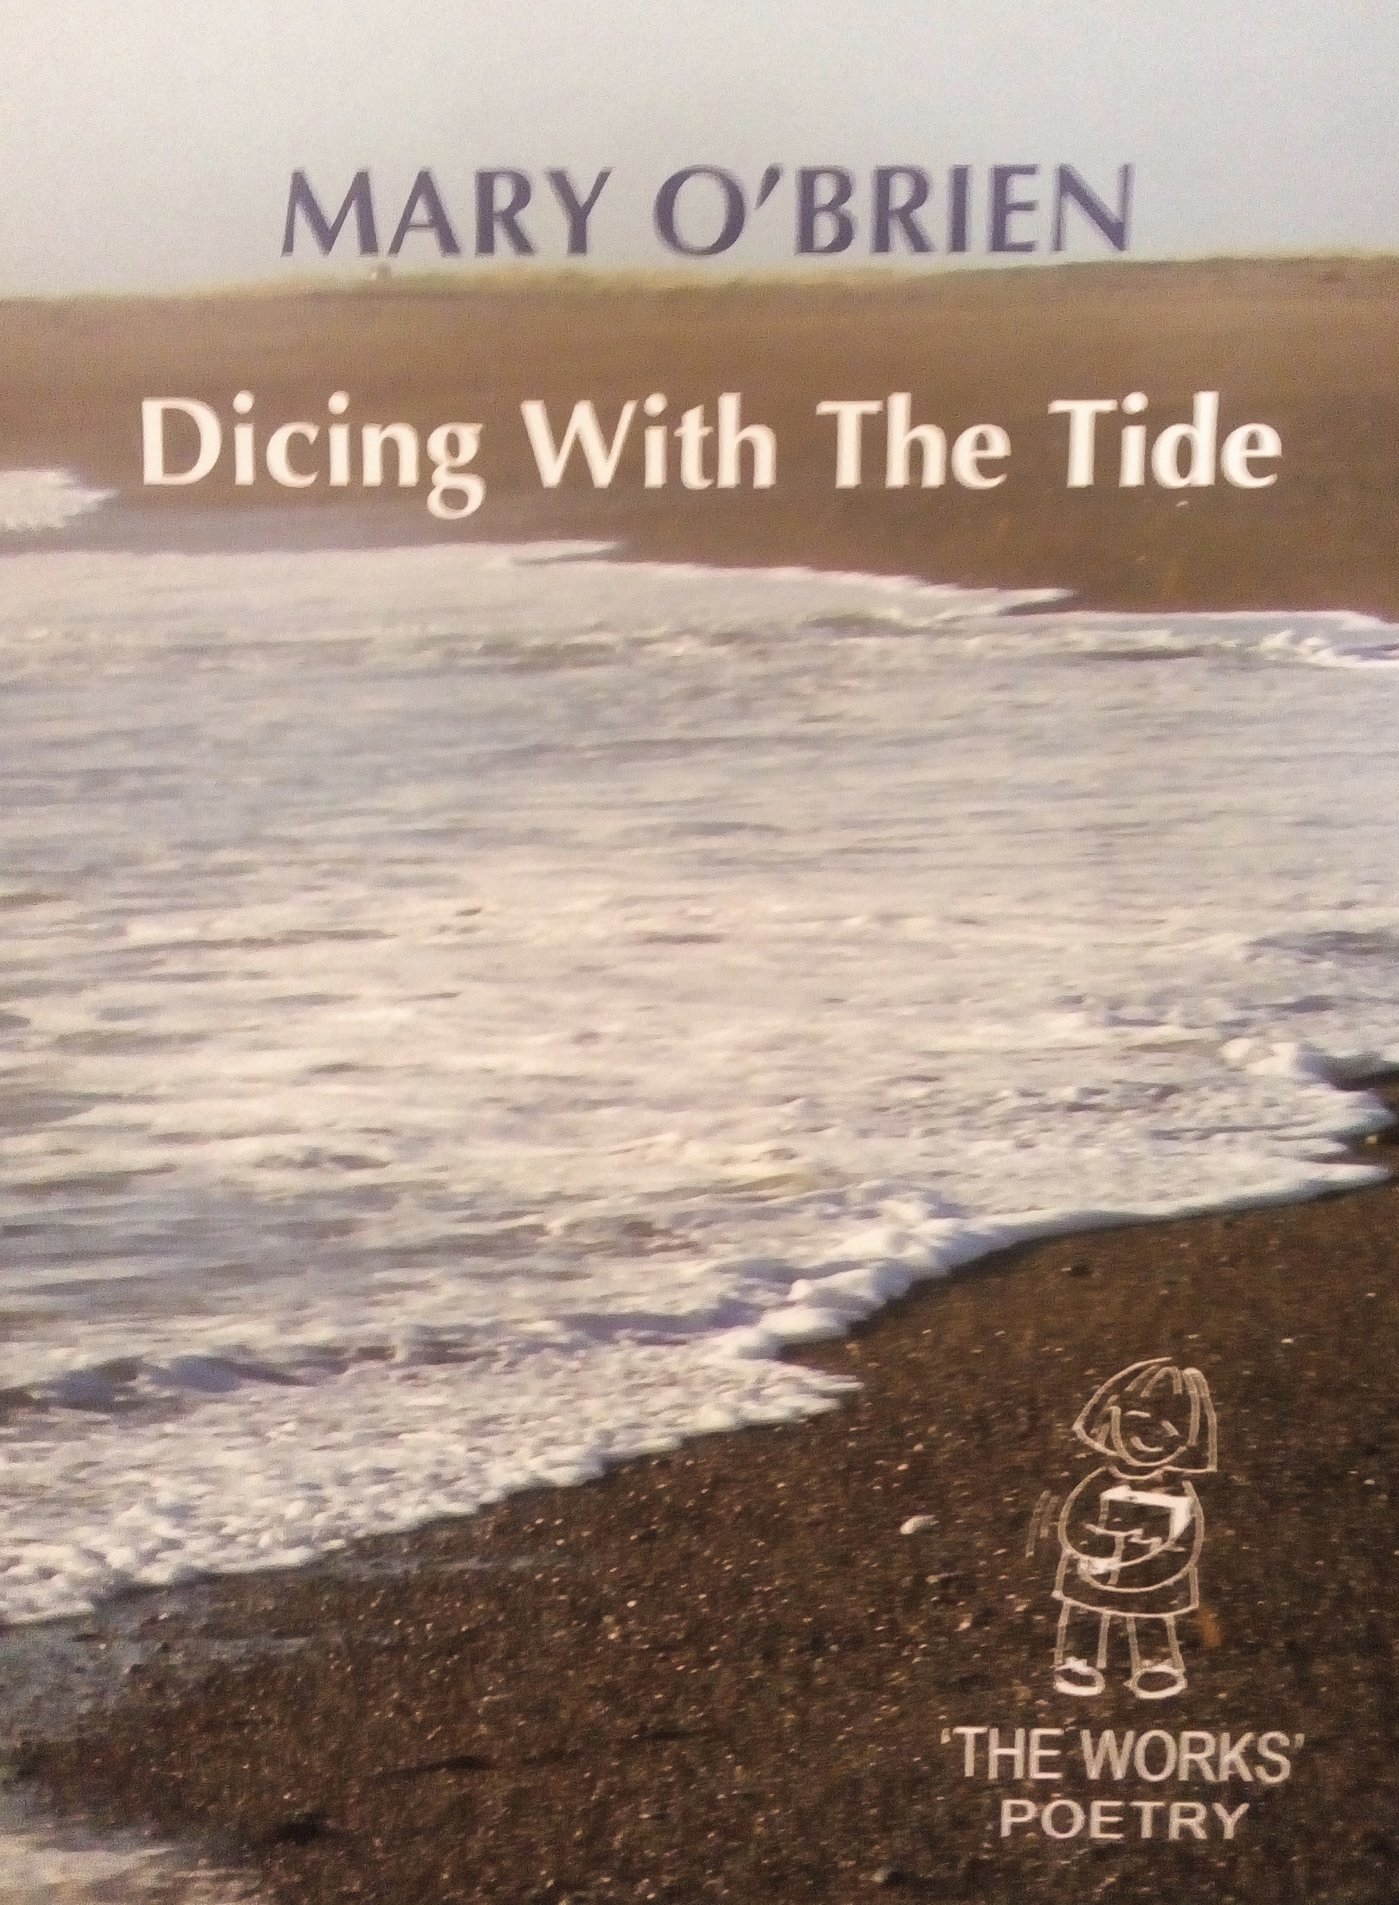 Dicing With the Tide by Mary O'Brien